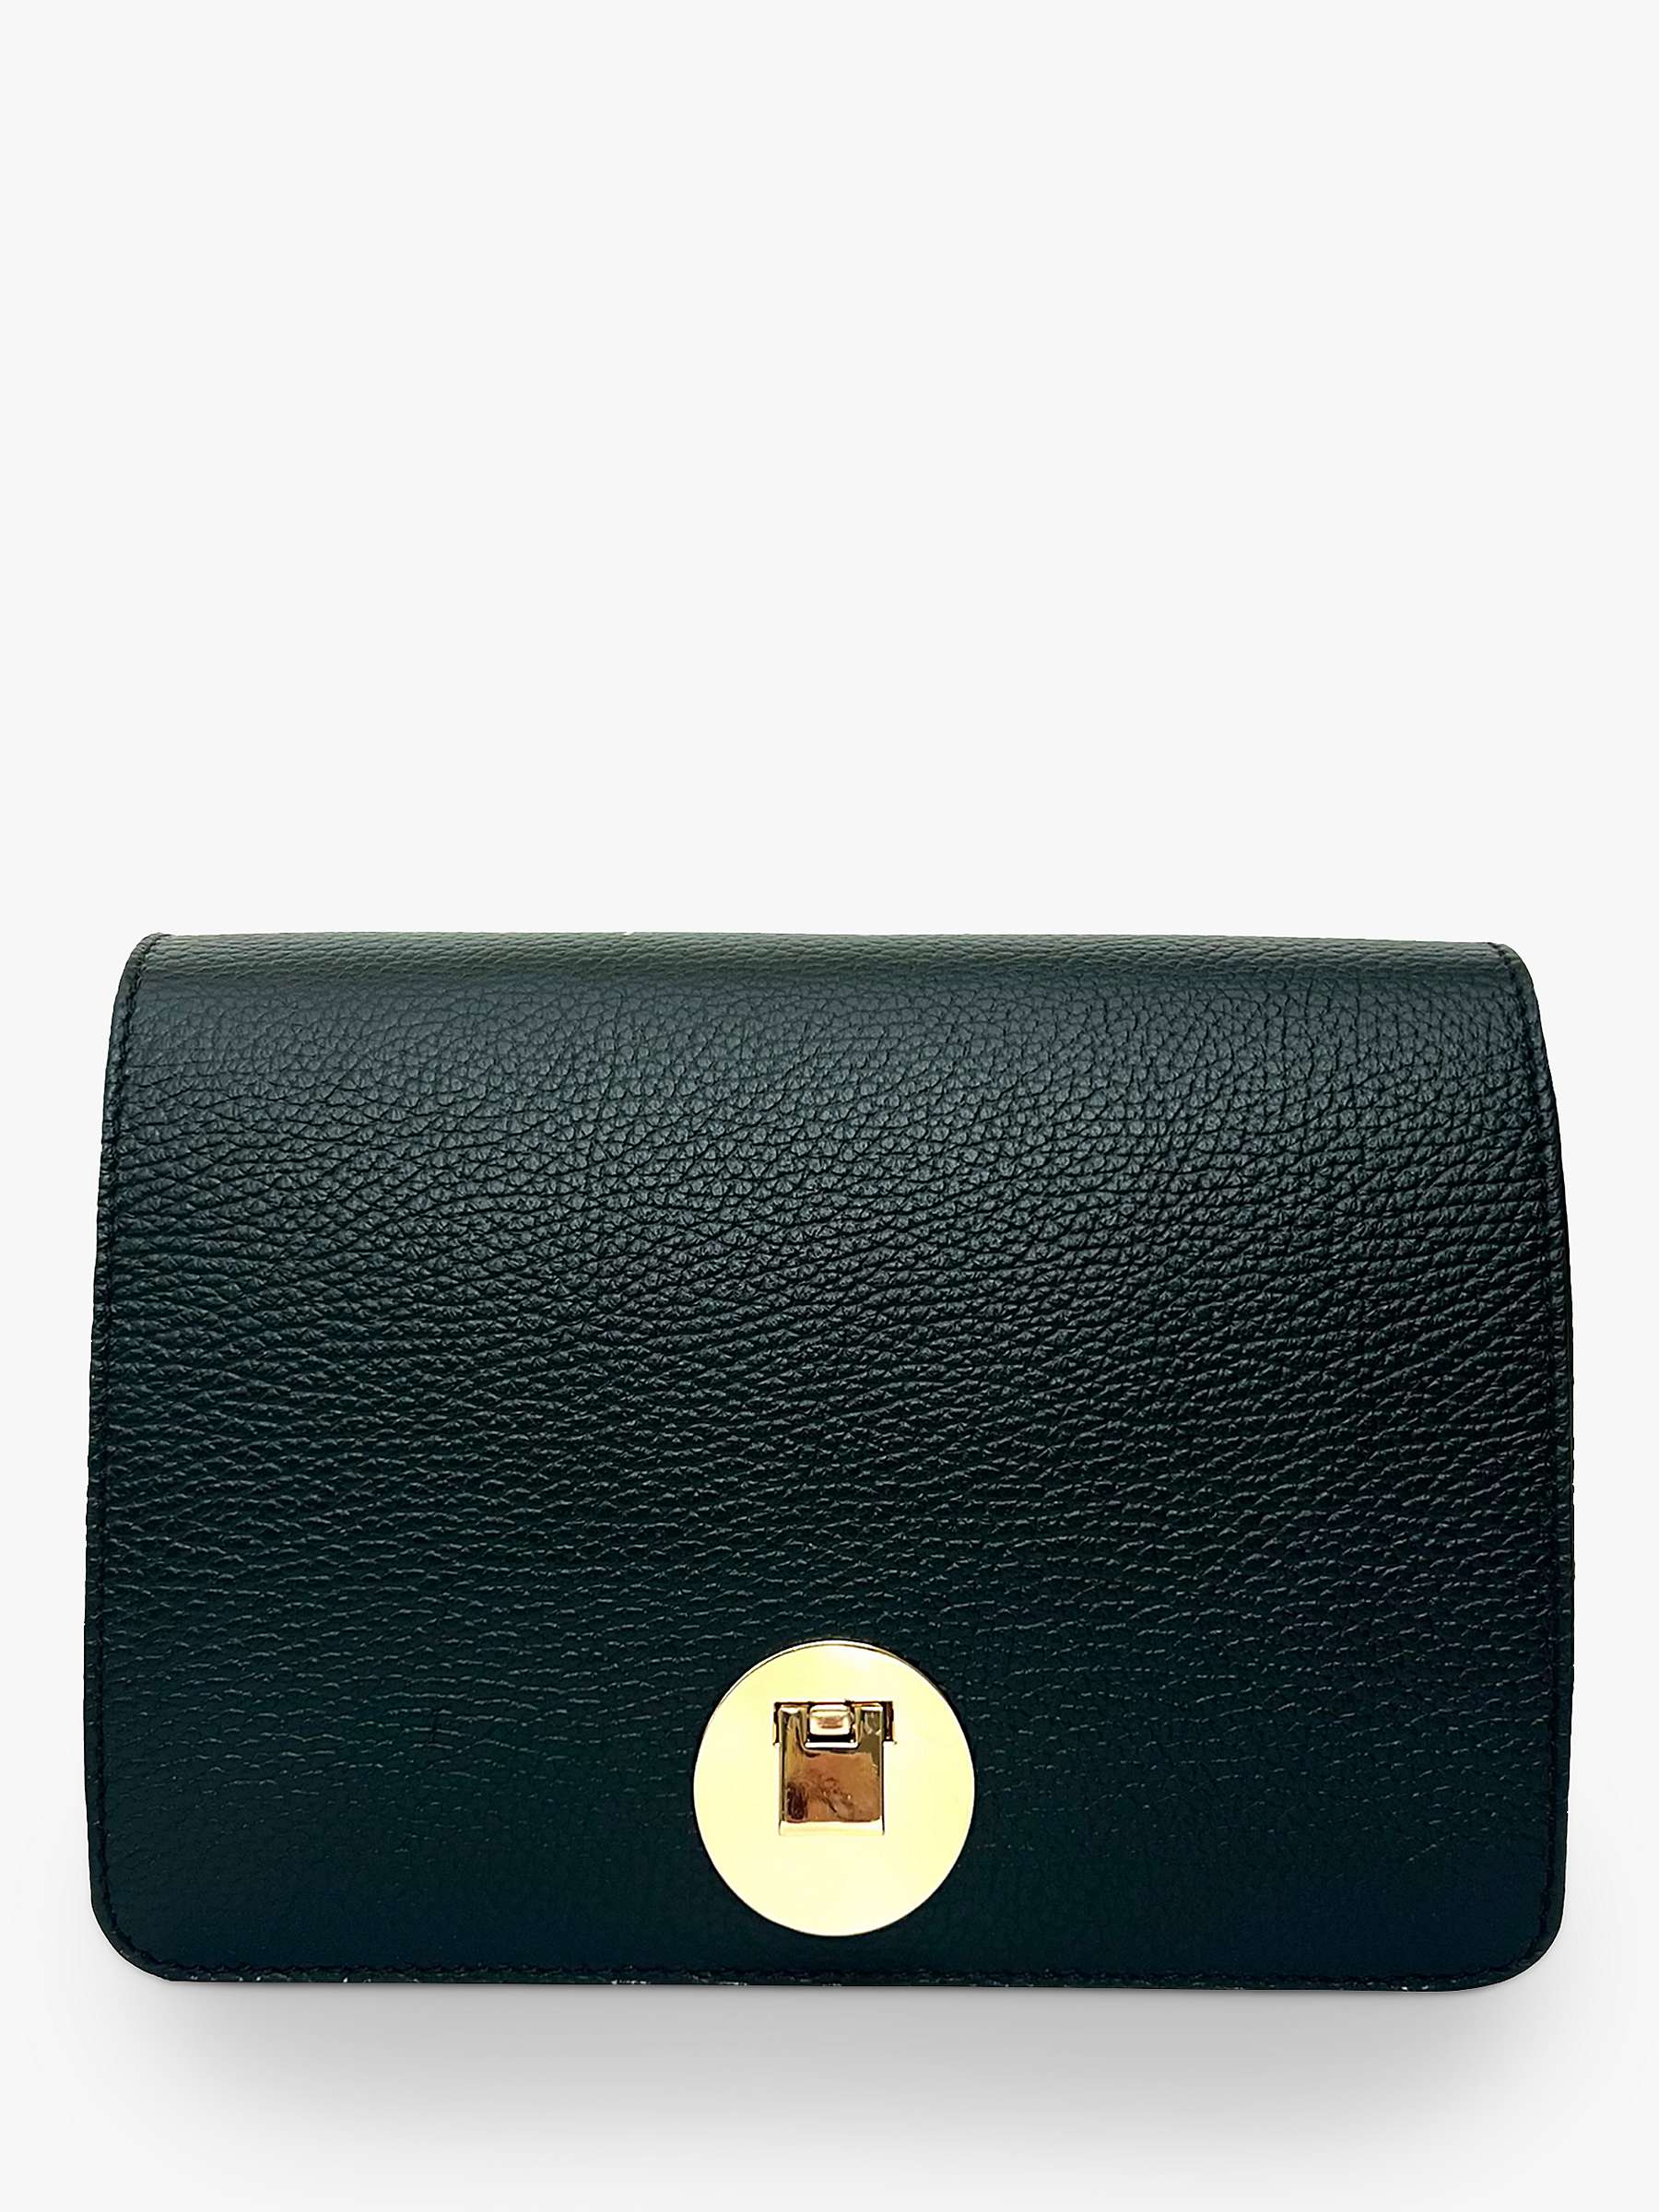 Buy Apatchy The Newbury Maxi Leather Cross Body Bag Online at johnlewis.com